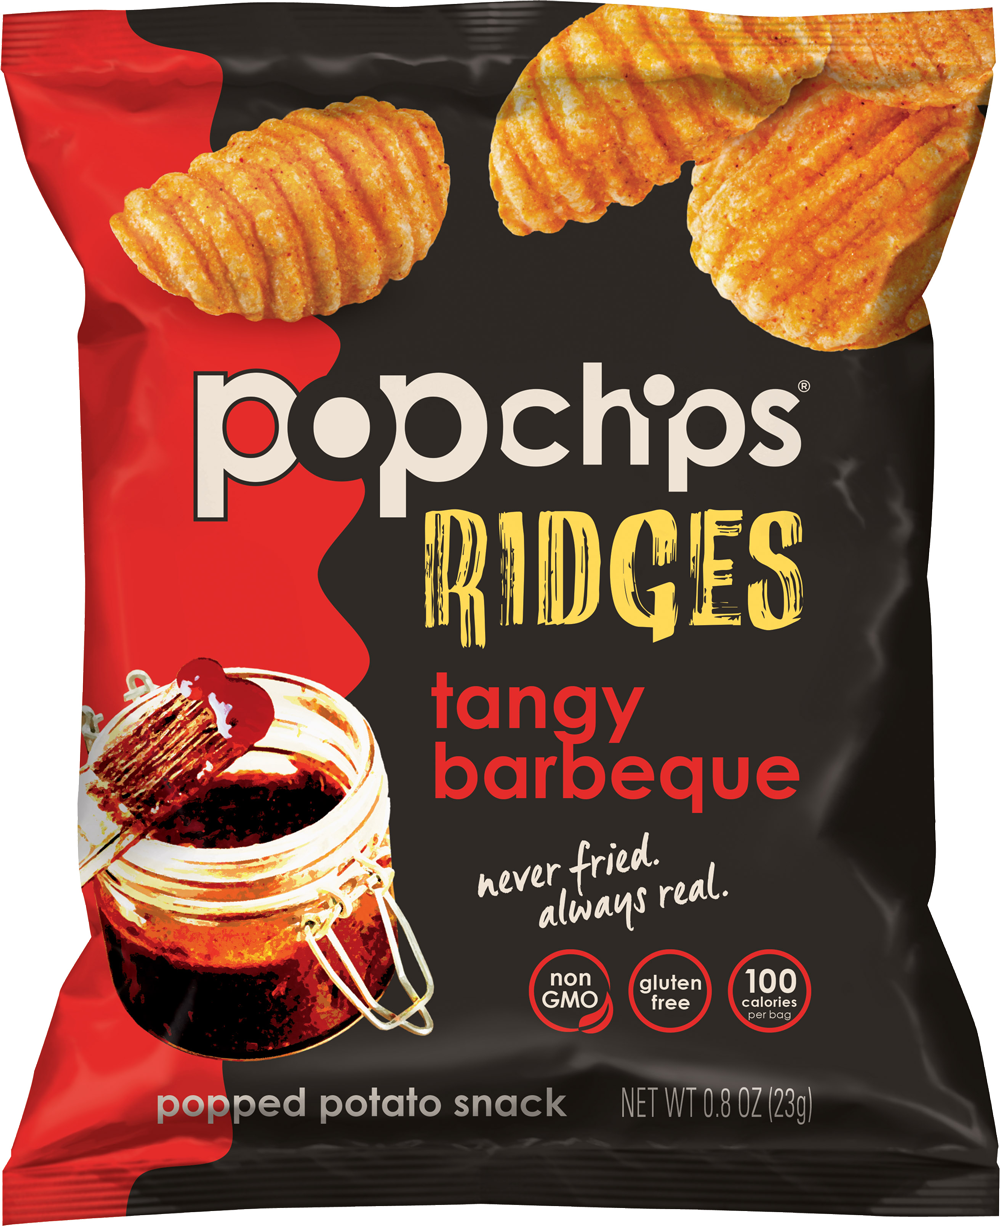 Healthy Office Snacks, Popchips Ridges, Tangy BBQ